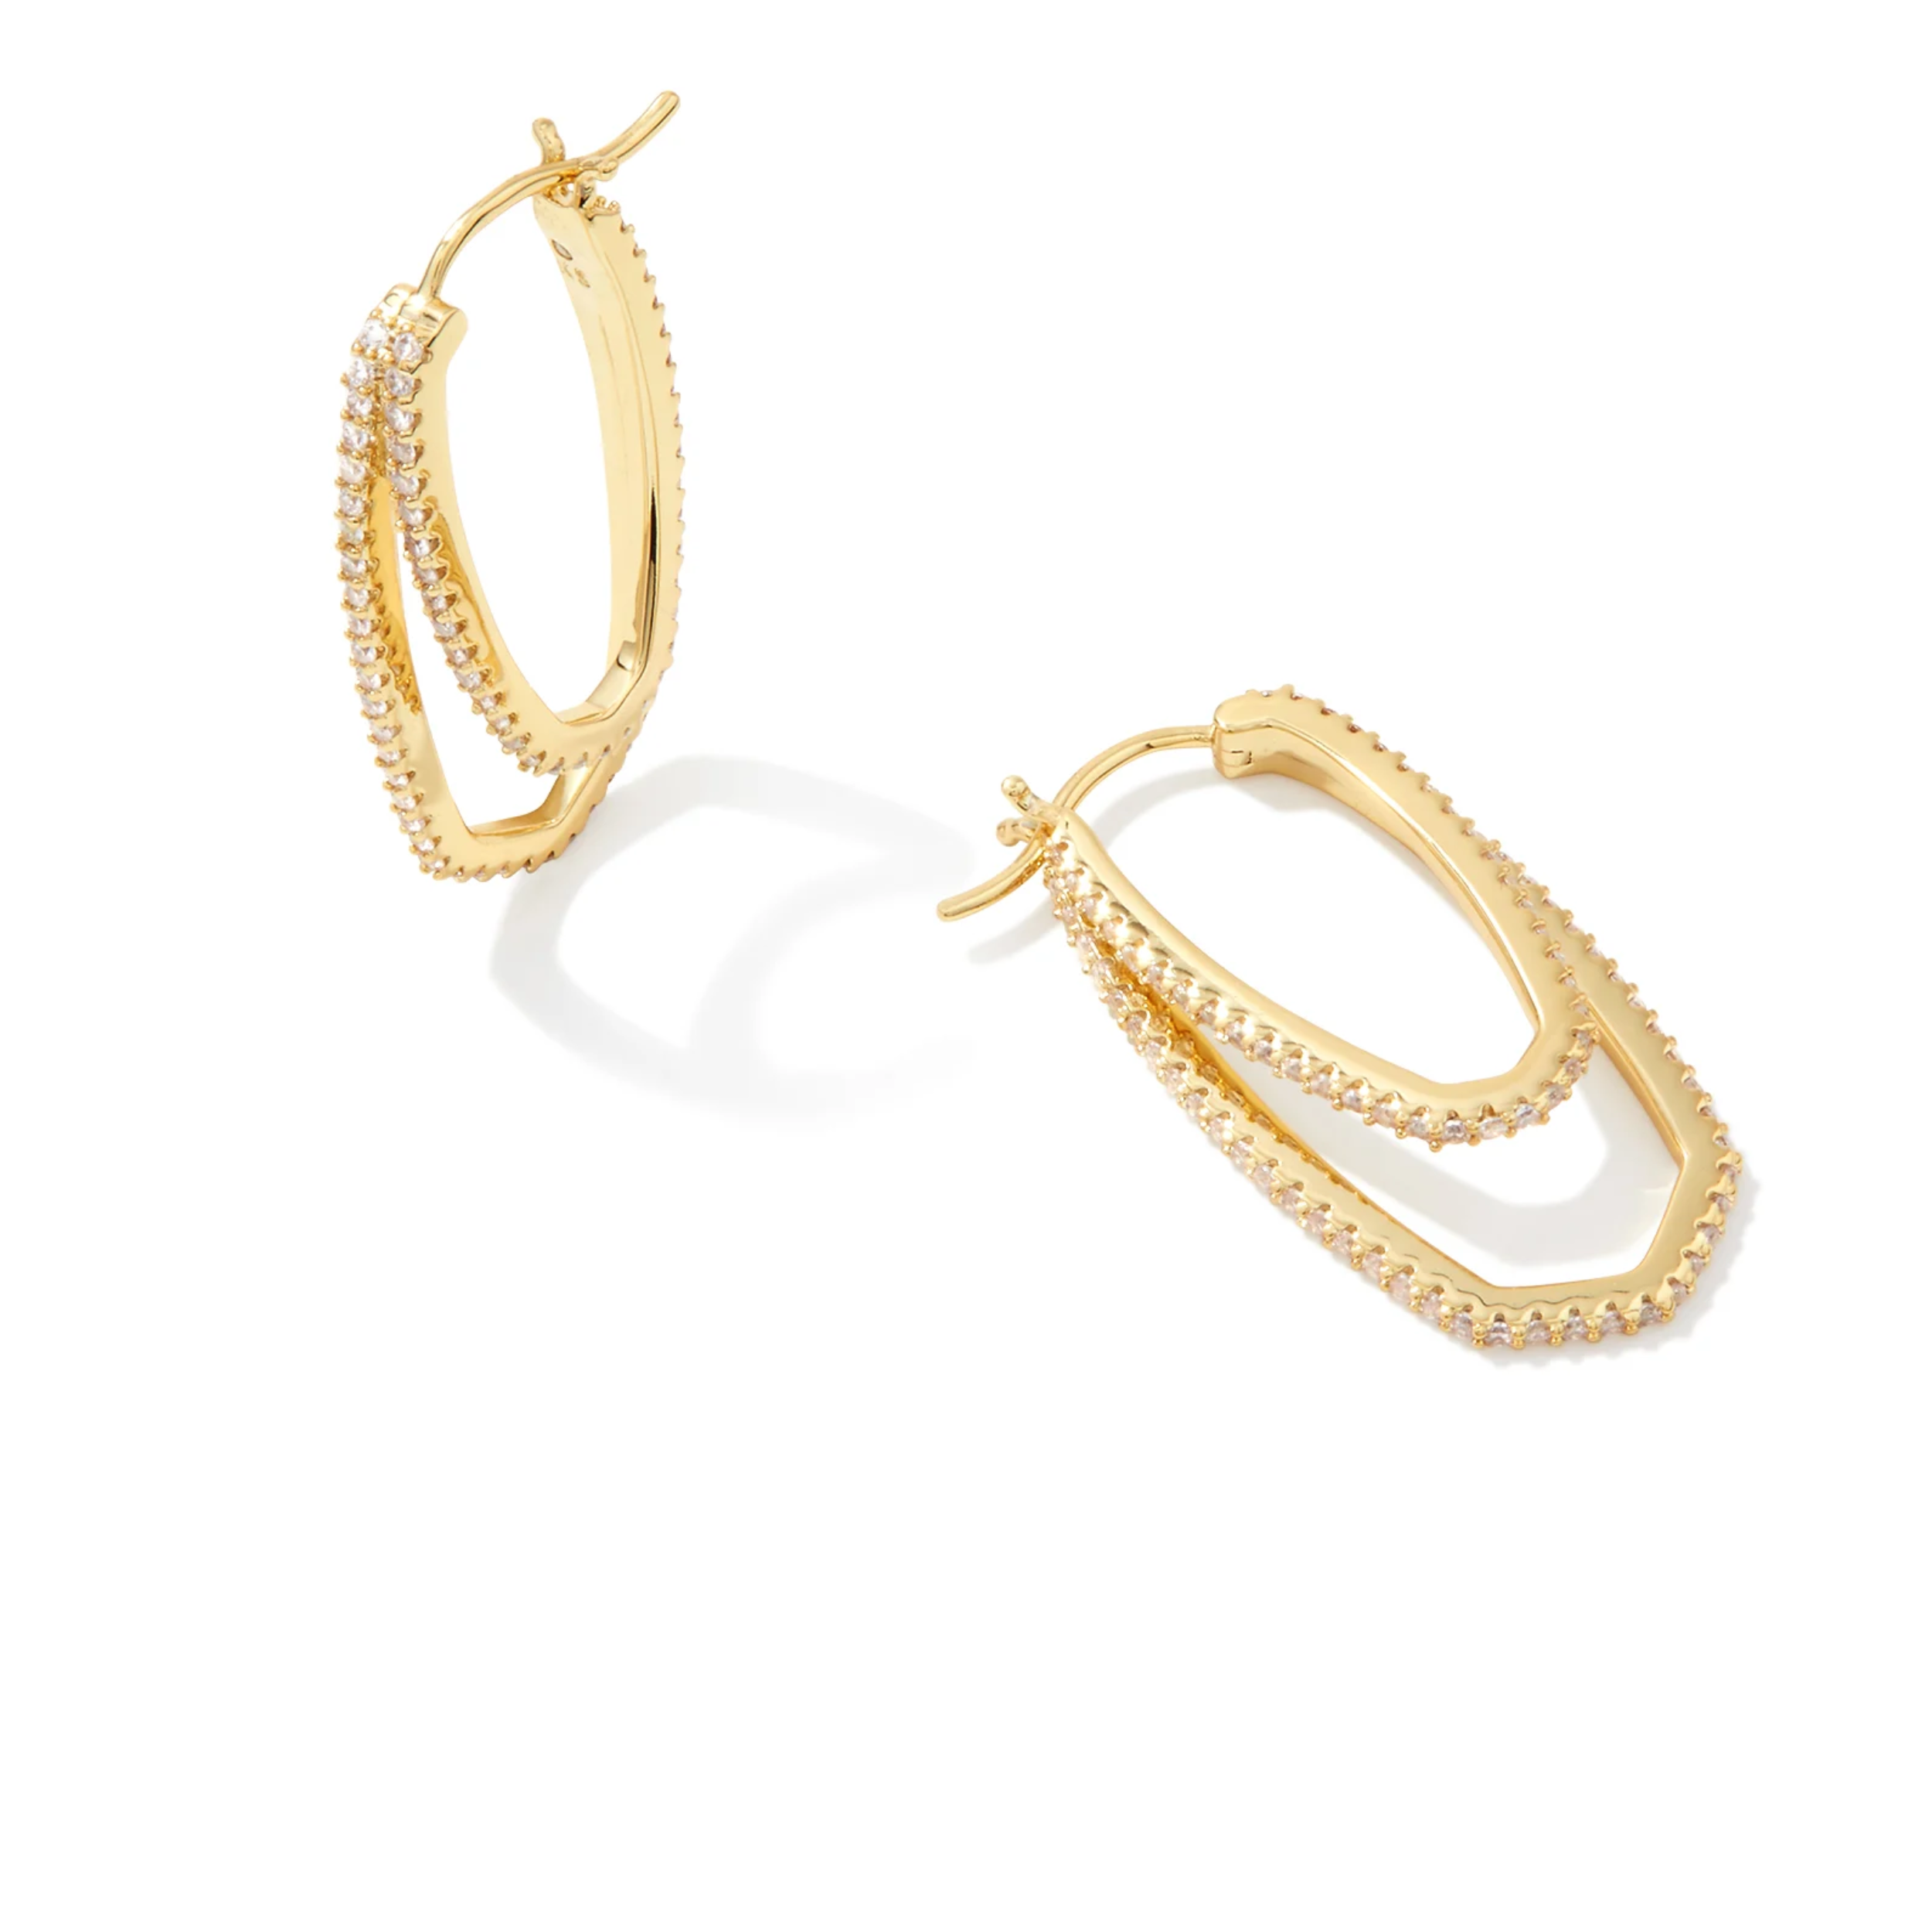 Kendra Scott | Murphy Gold Hoop Earrings in White Crystal - Giddy Up Glamour Boutique